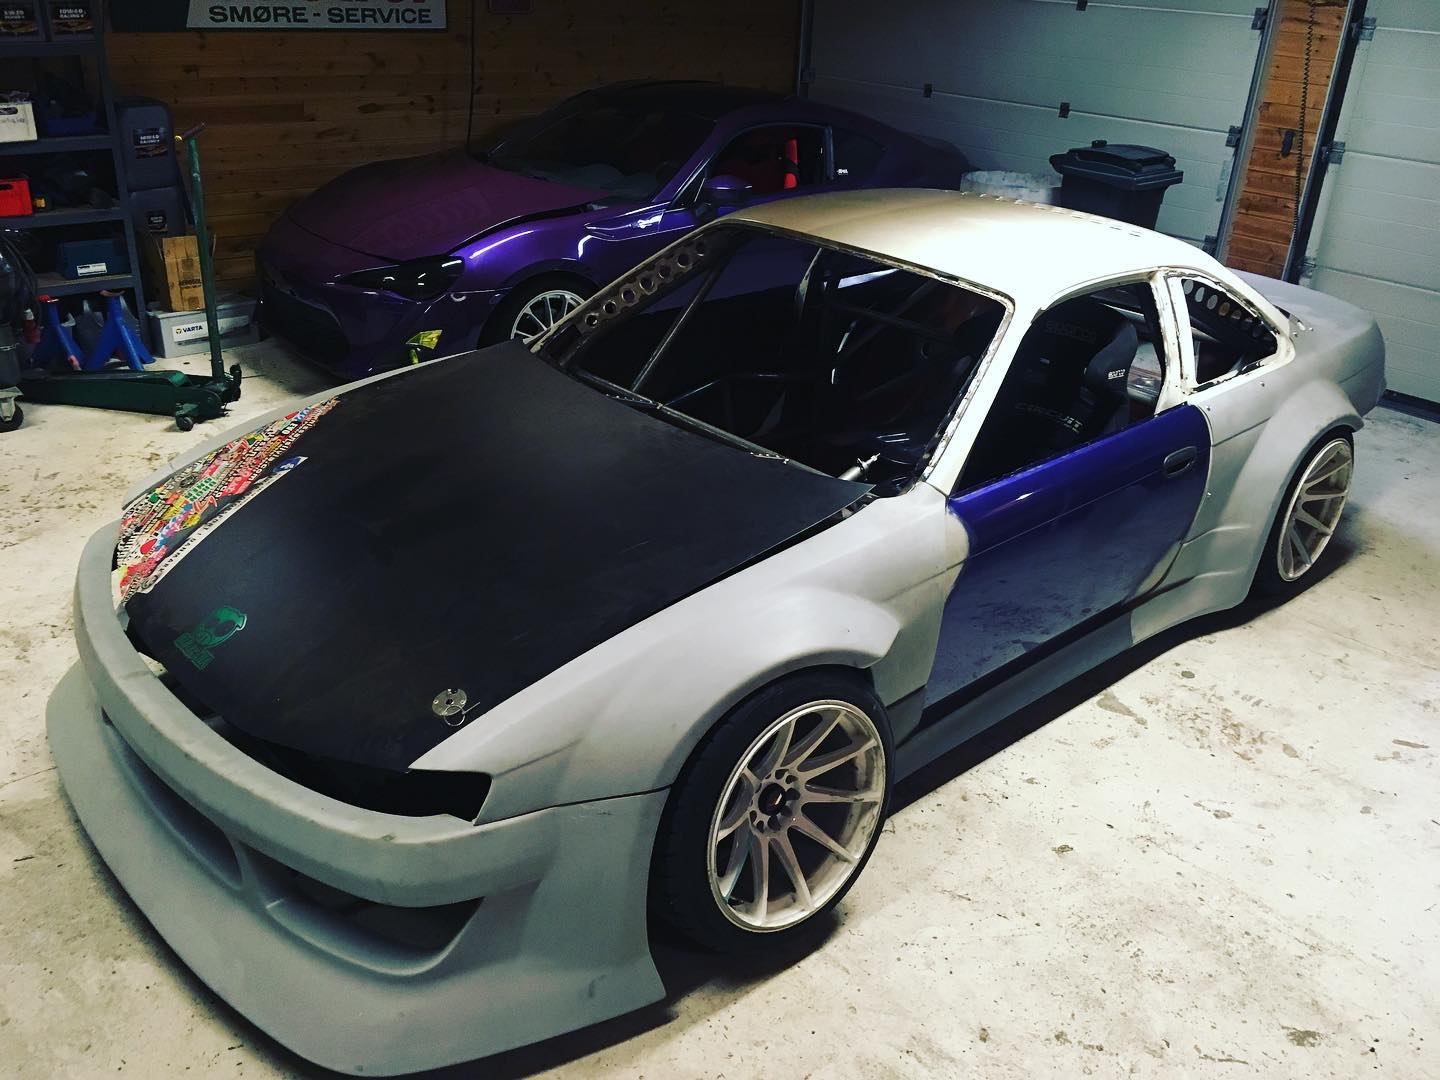 Nissan S14 with a turbo Audi inline-five